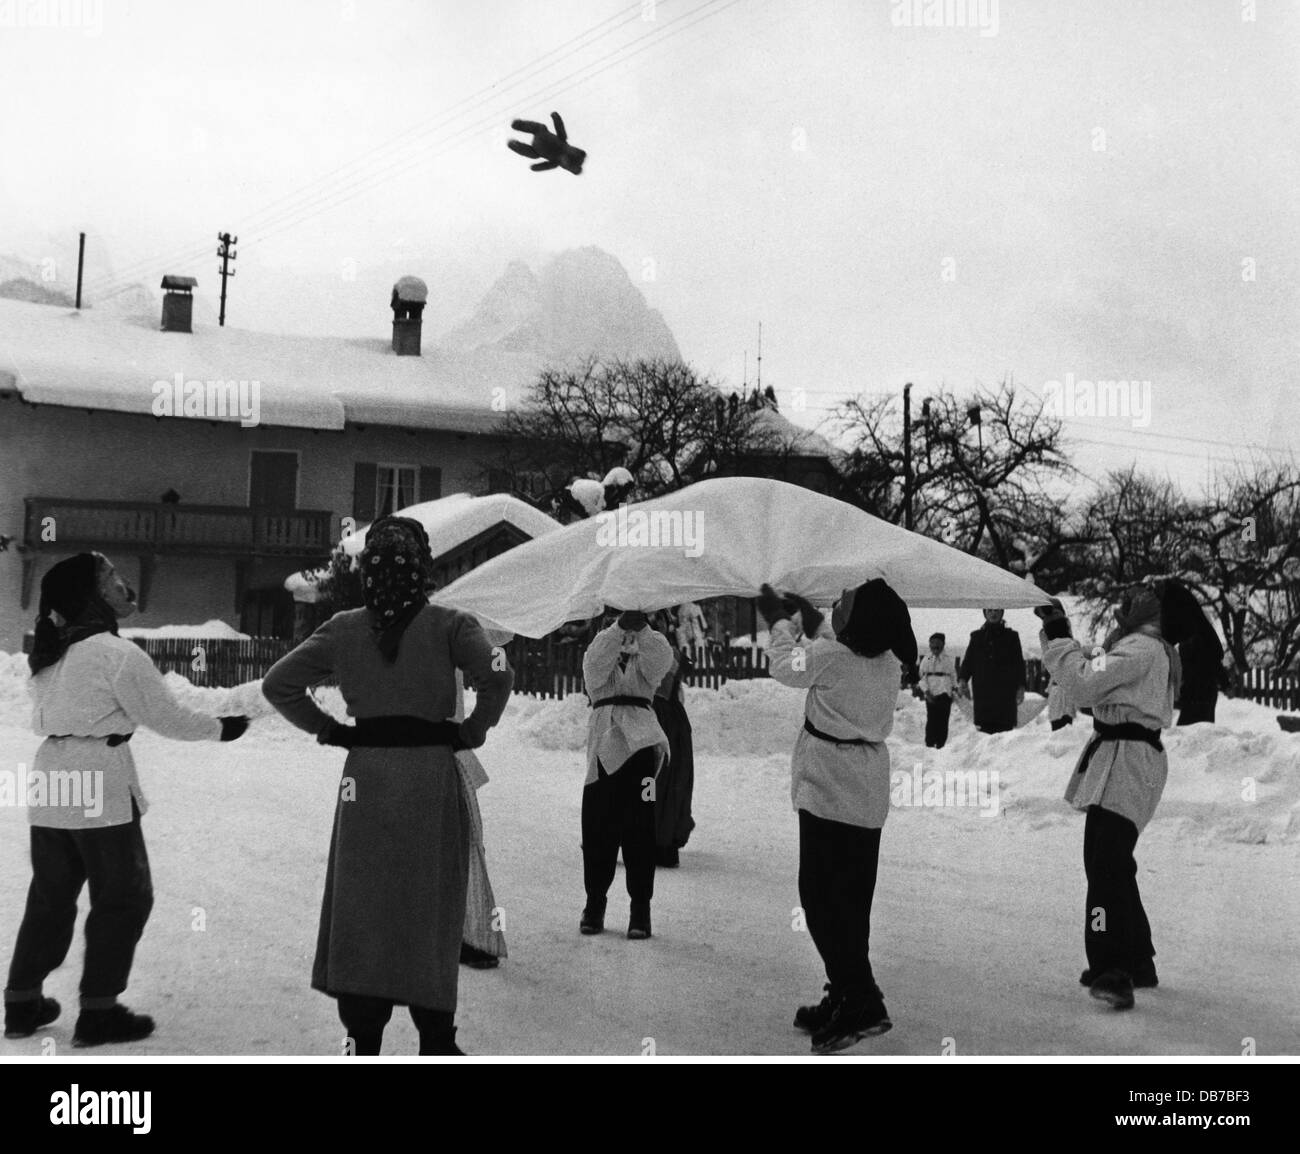 festivities, carnival at Partenkirchen, children with wooden masks throwing teddy bear with blanket in the air, Garmisch - Partenkirchen, 1956, Additional-Rights-Clearences-Not Available Stock Photo